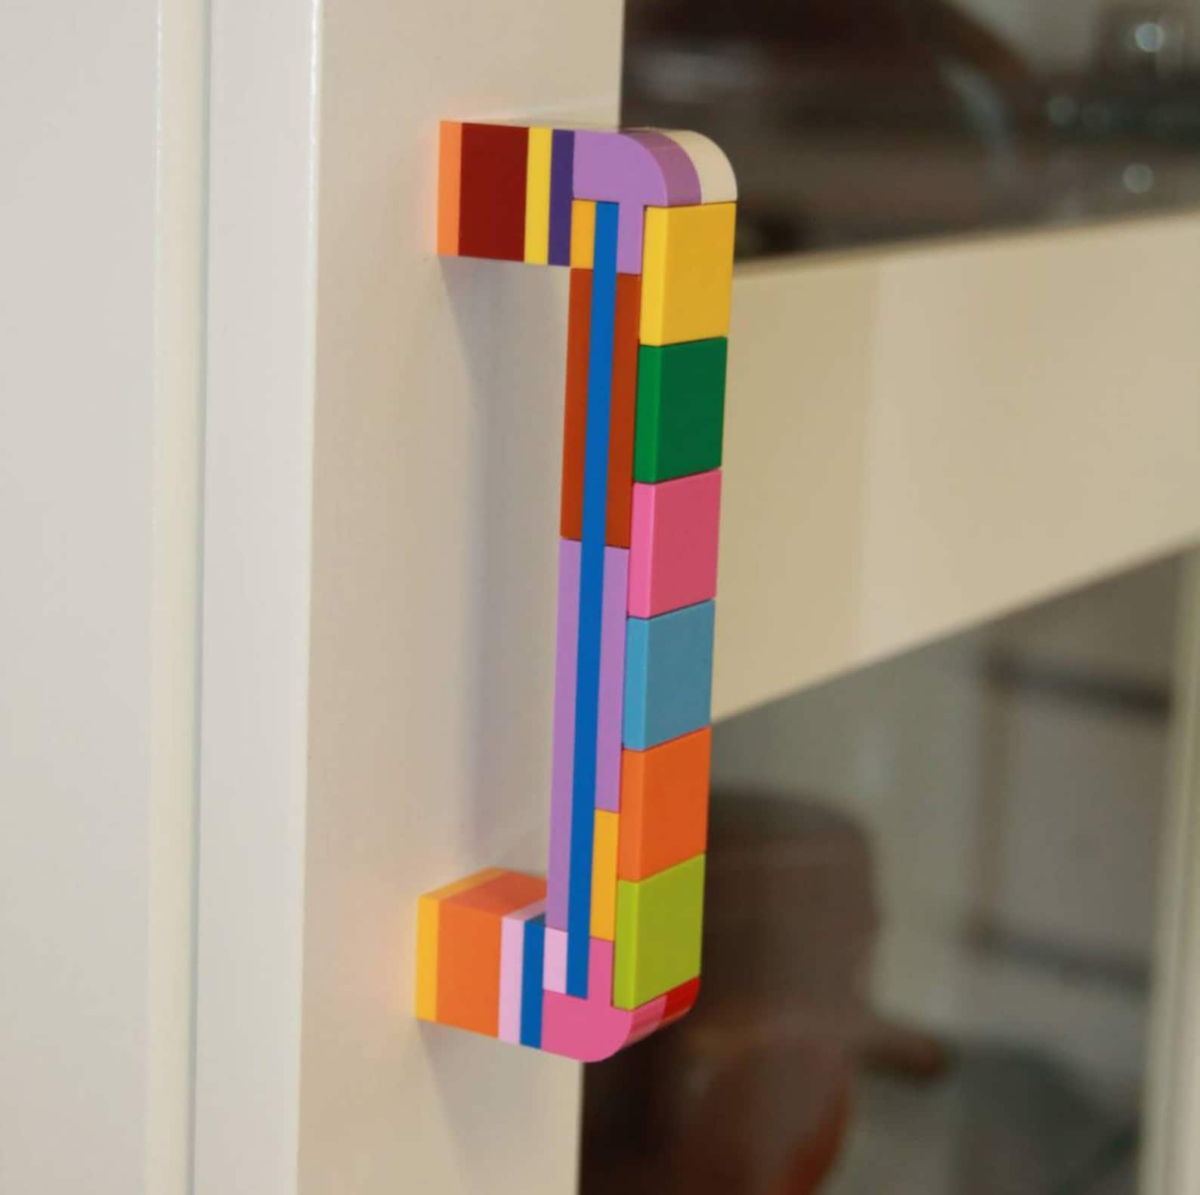 Rainbow door handle | How to Add Pops of Color to Your Home on a Budget